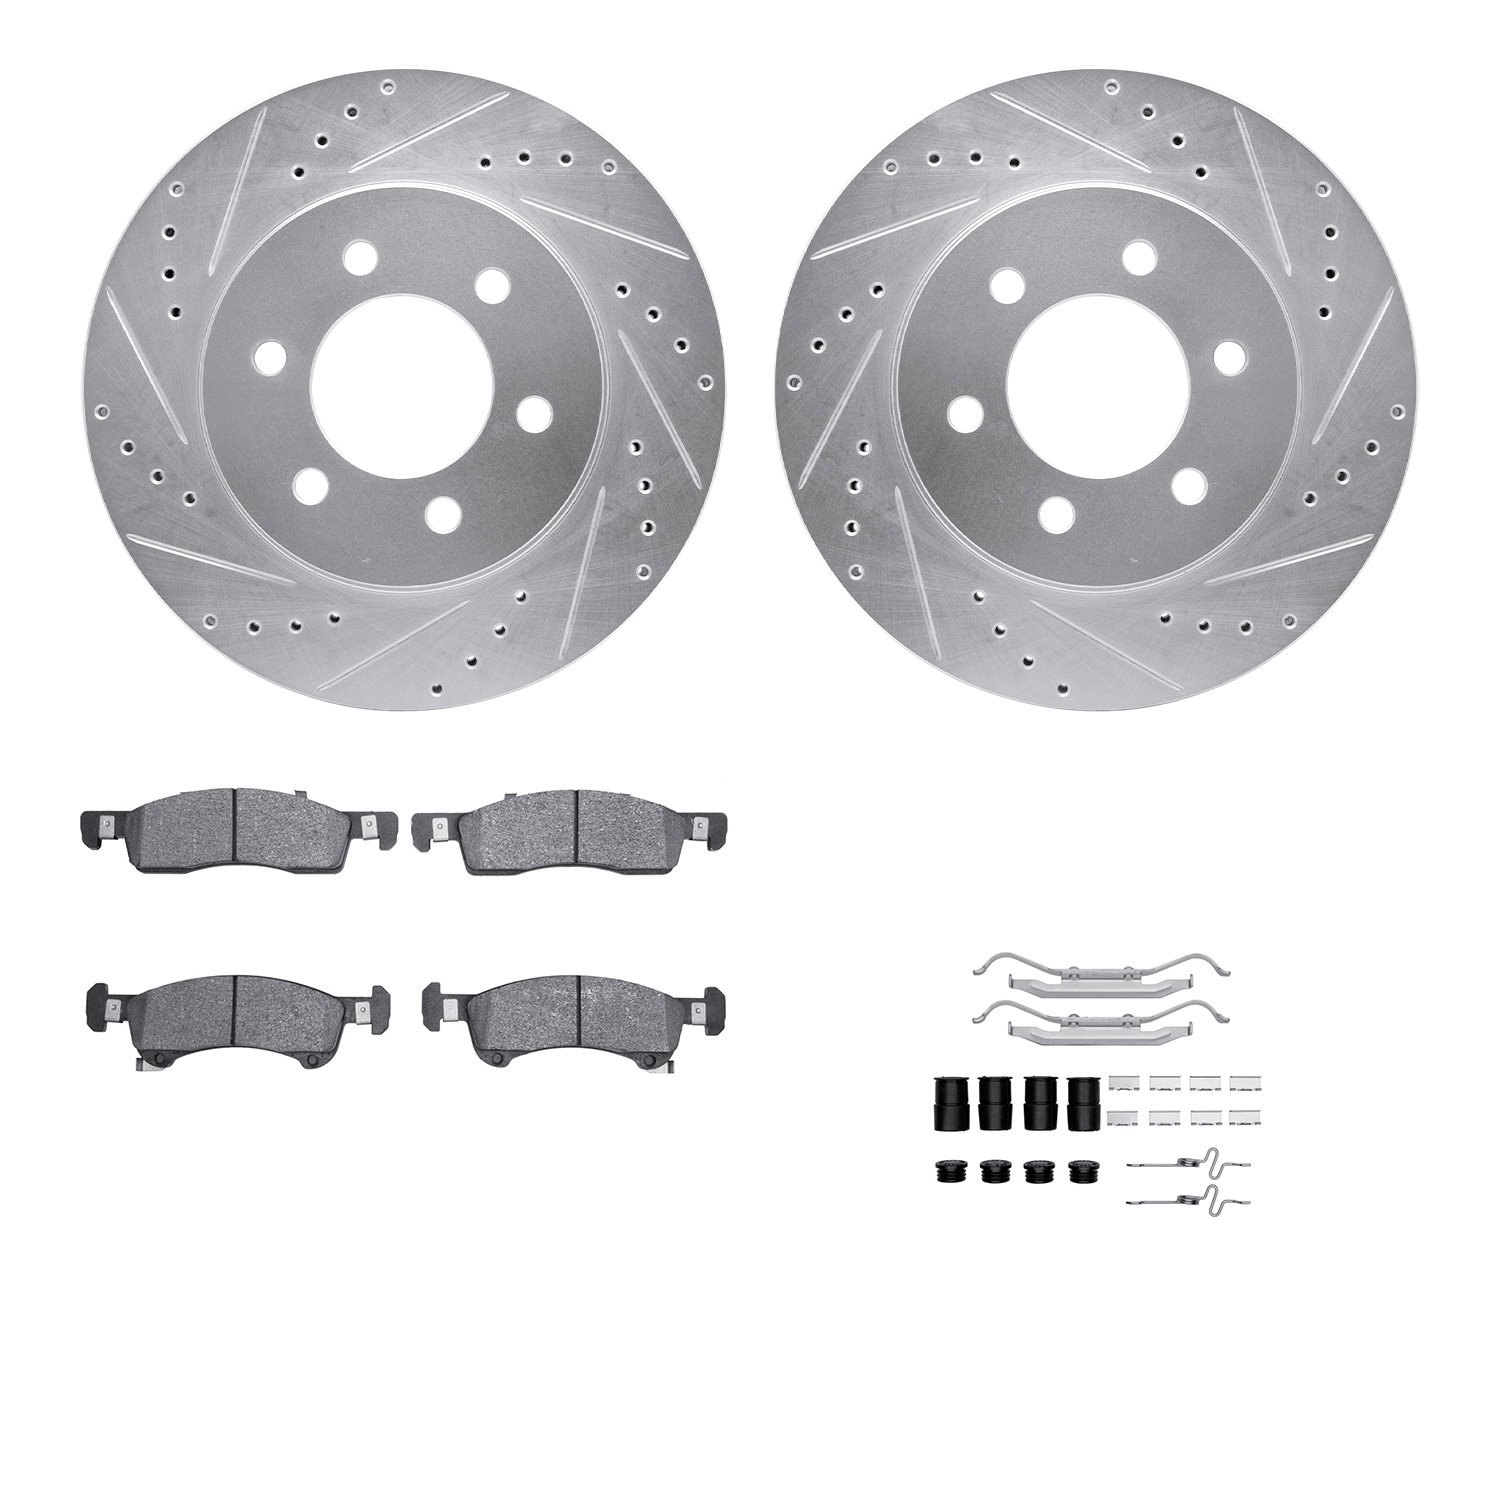 7212-99181 Drilled/Slotted Rotors w/Heavy-Duty Brake Pads Kit & Hardware [Silver], 2002-2006 Ford/Lincoln/Mercury/Mazda, Positio